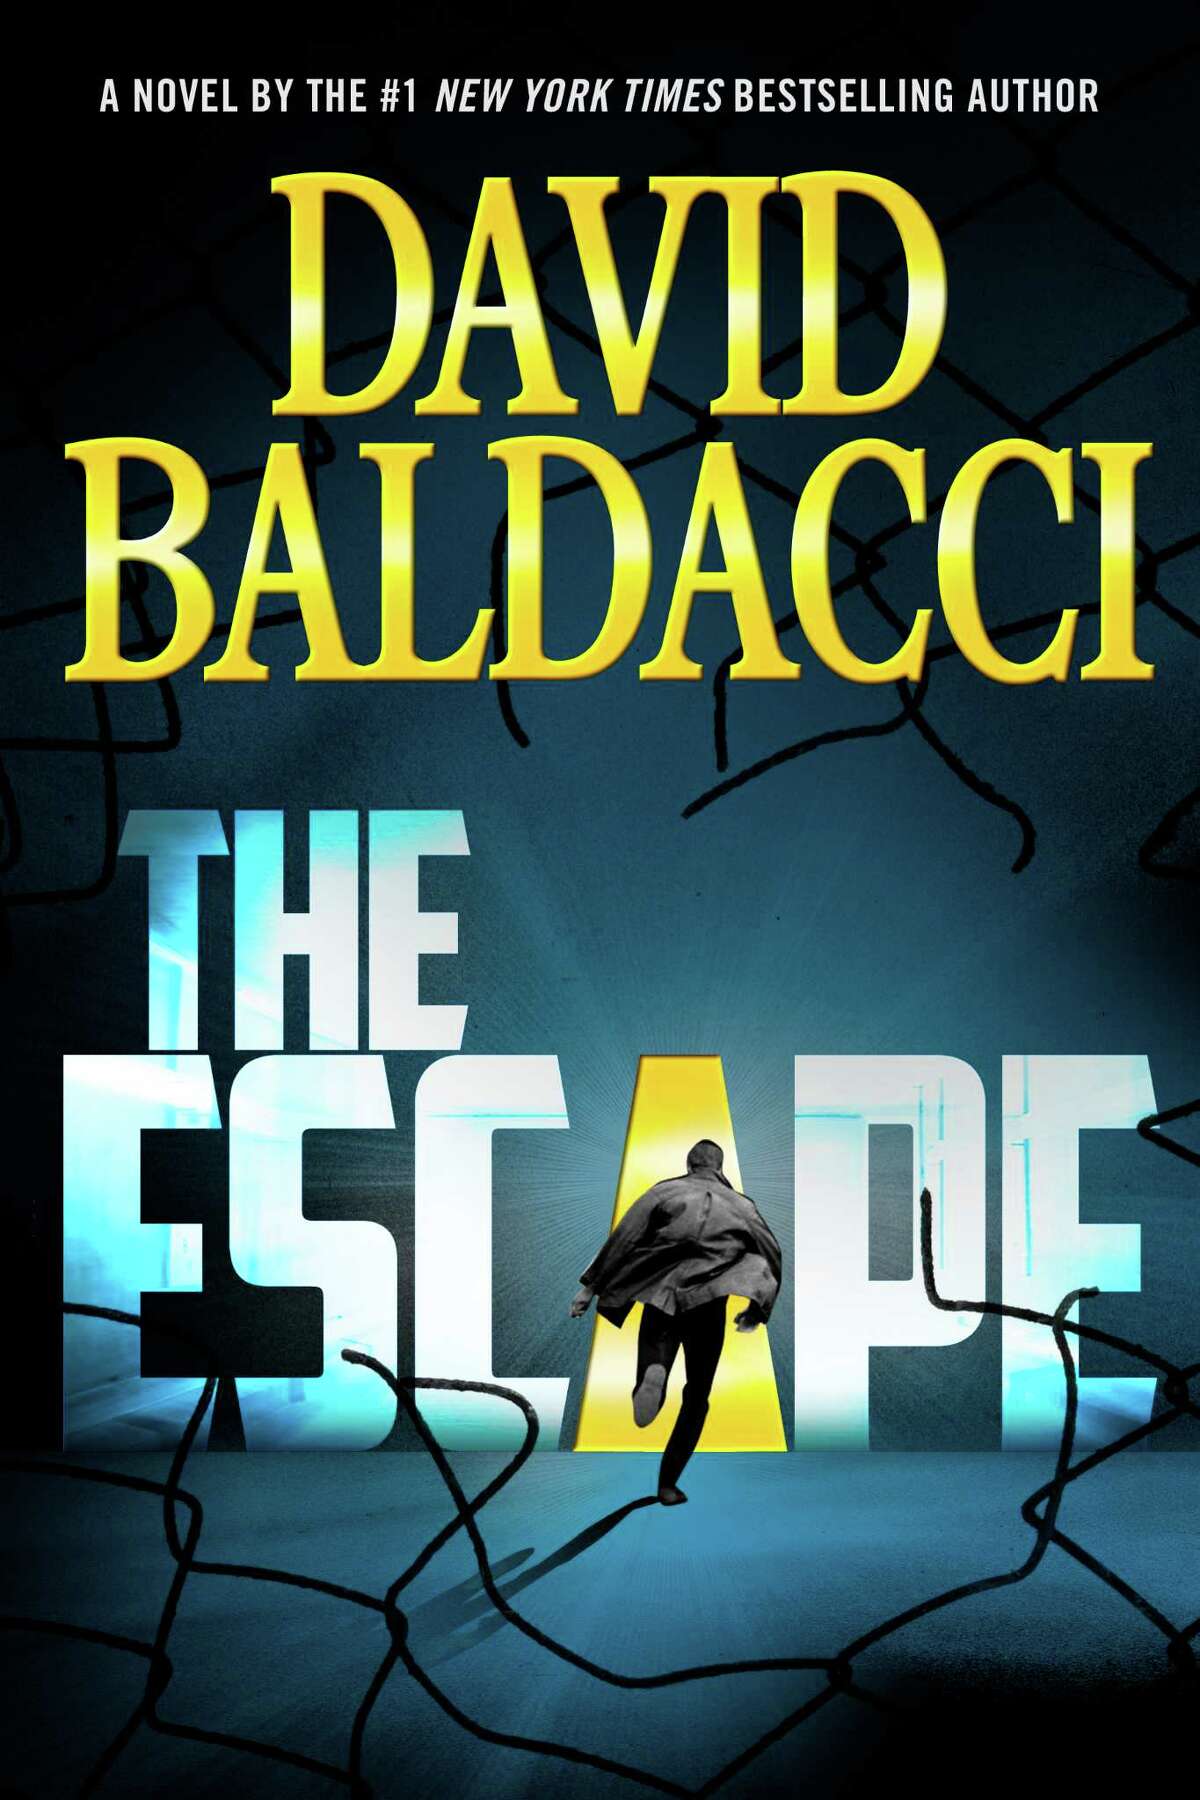 David Baldacci's latest paranoid thriller "The Escape" follows agent John Puller as he tries to figure out why his older brother was branded a traitor and placed in a military prison before engineering a mysterious escape.